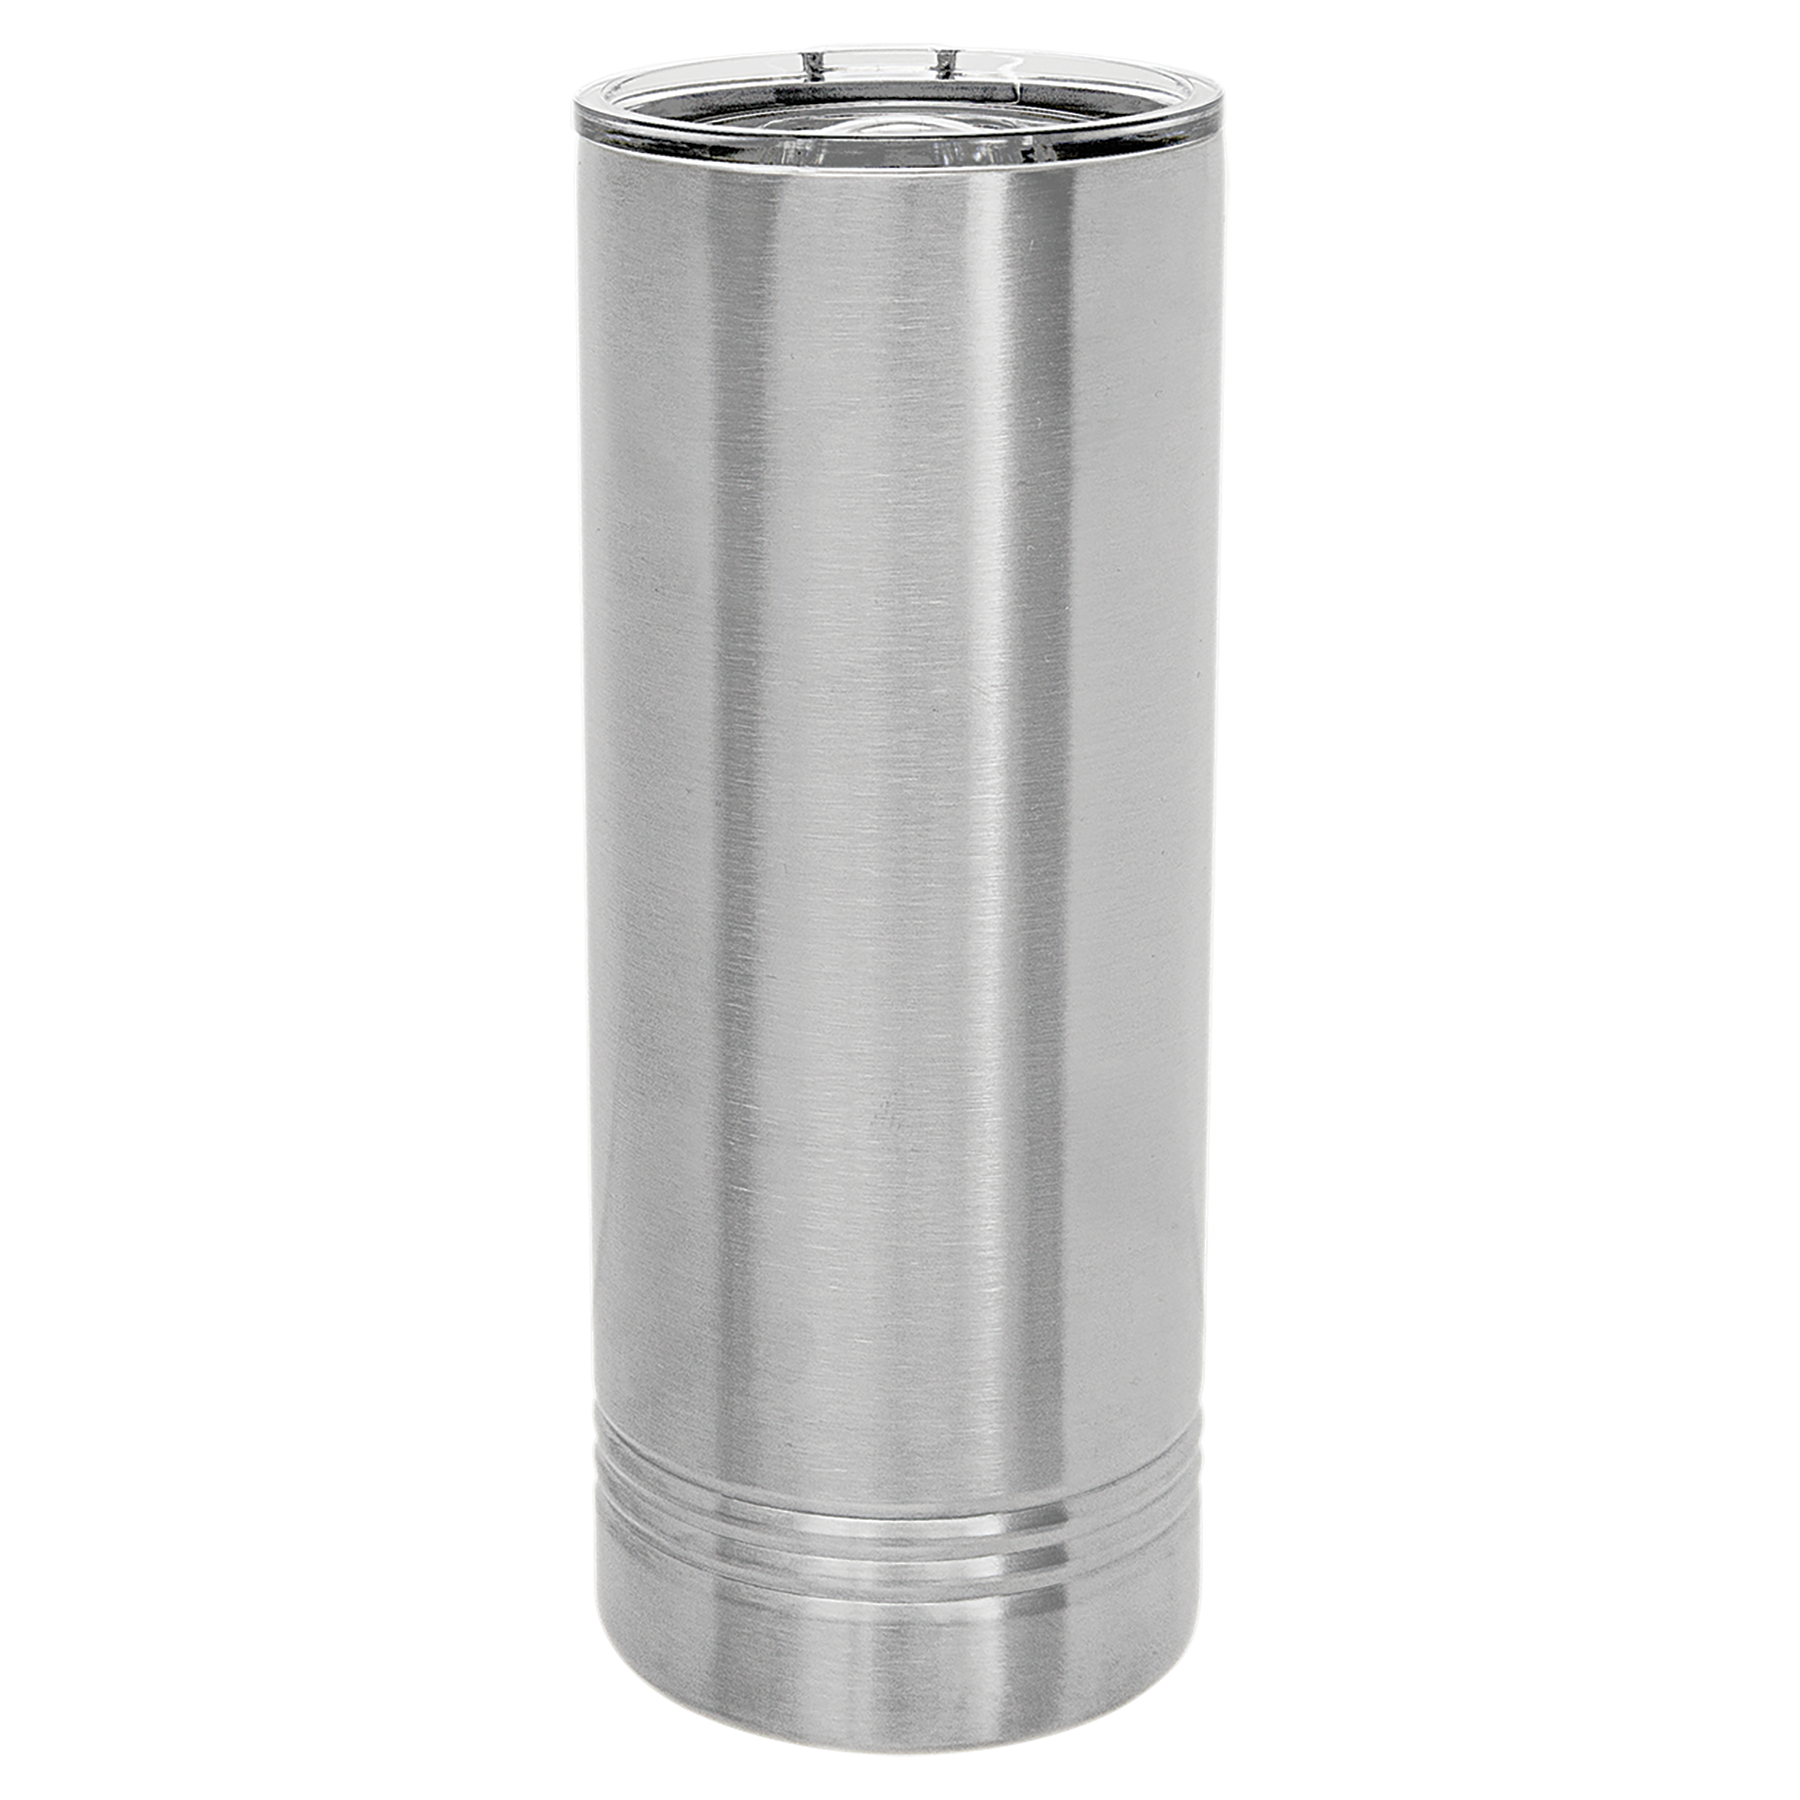 Stainless Steel 22oz Skinny Tumbler -One Free Engraving  -Fits most Cup Holders  -Double-wall Vacuum Insulated  -Made from 18/8 Gauge Stainless Steel (Type 304 Food Grade)  -Lid is BPA Free (Hand Wash Only)  -Dishwasher Safe  -Works with Cold and Hot Drinks  -18 Color Options  -Perfect for Personalized Gifts, Awards, Incentives, Swag & Fundraisers